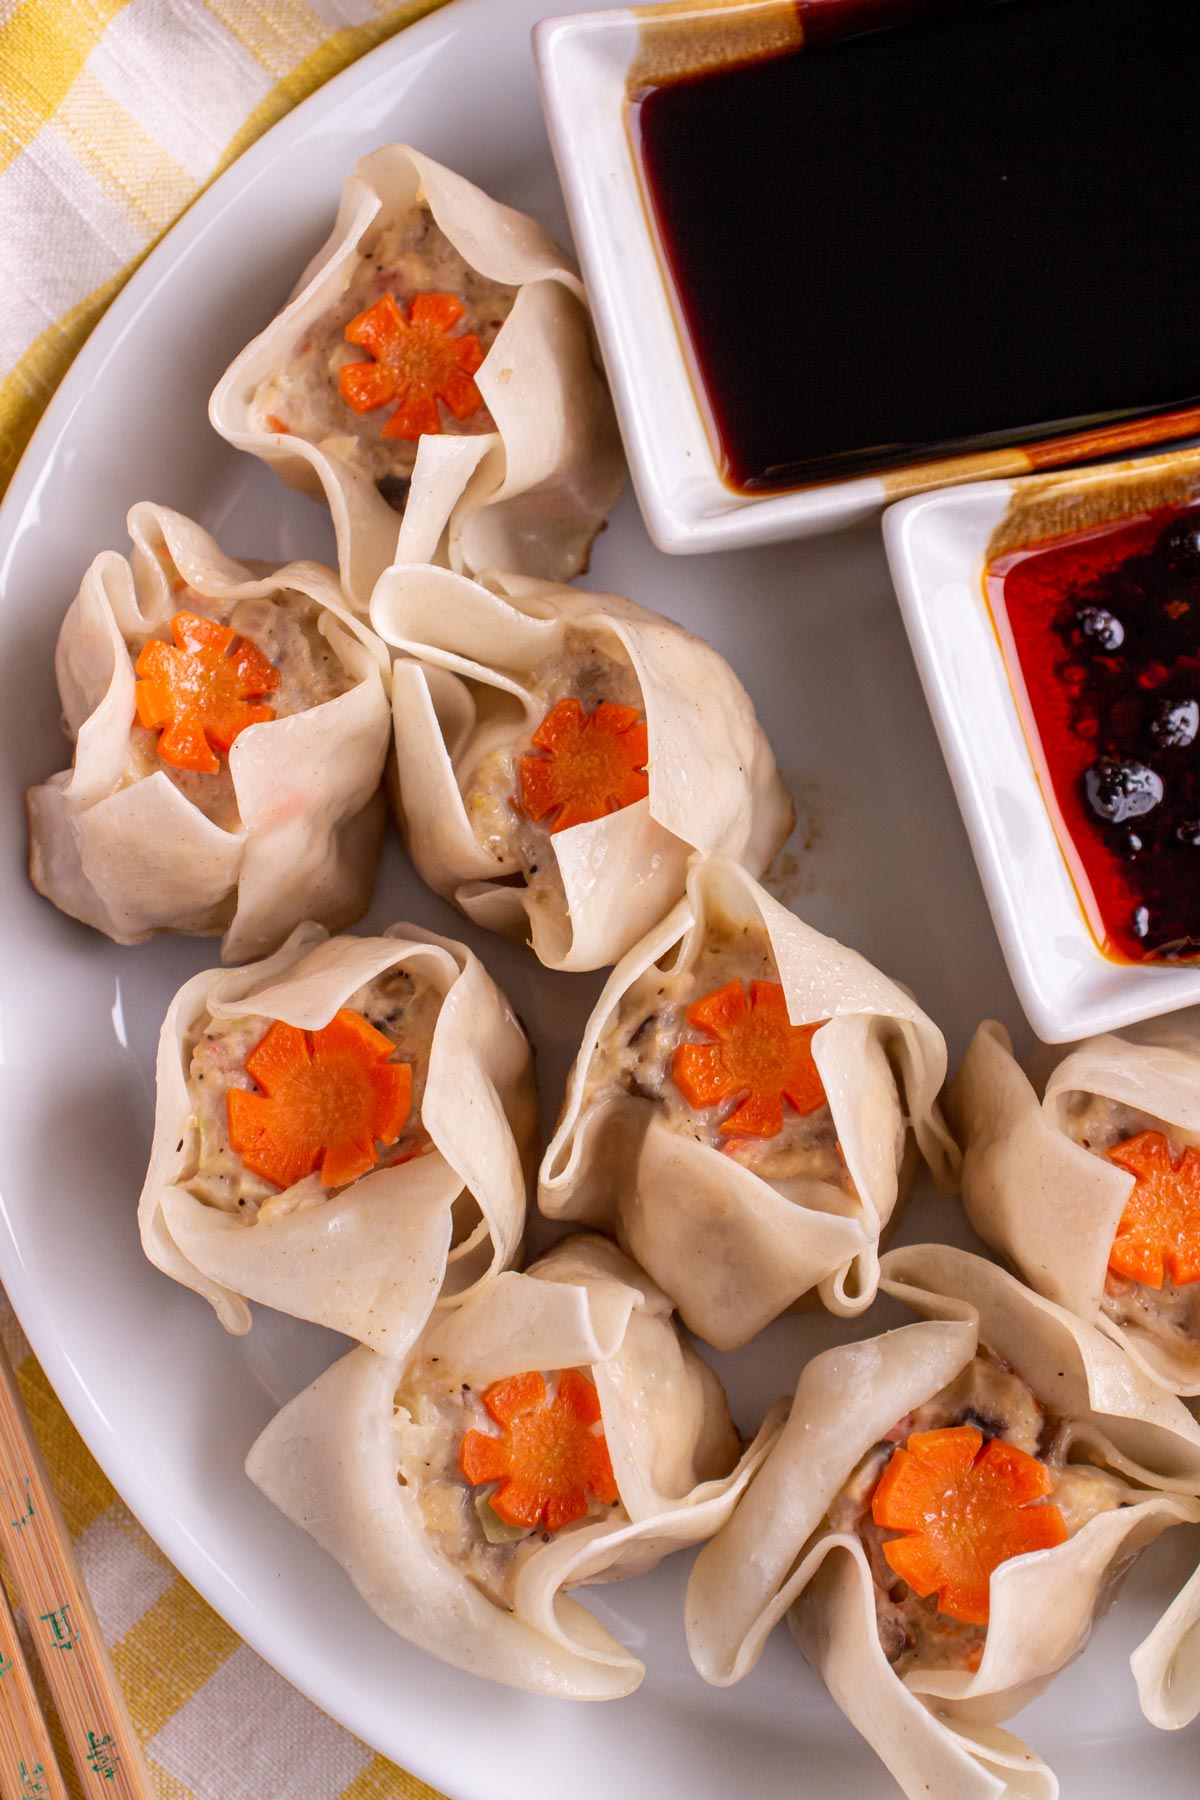 Chicken shumai dumplings topped with carrot garnishes on a white plate with dipping sauce bowls.